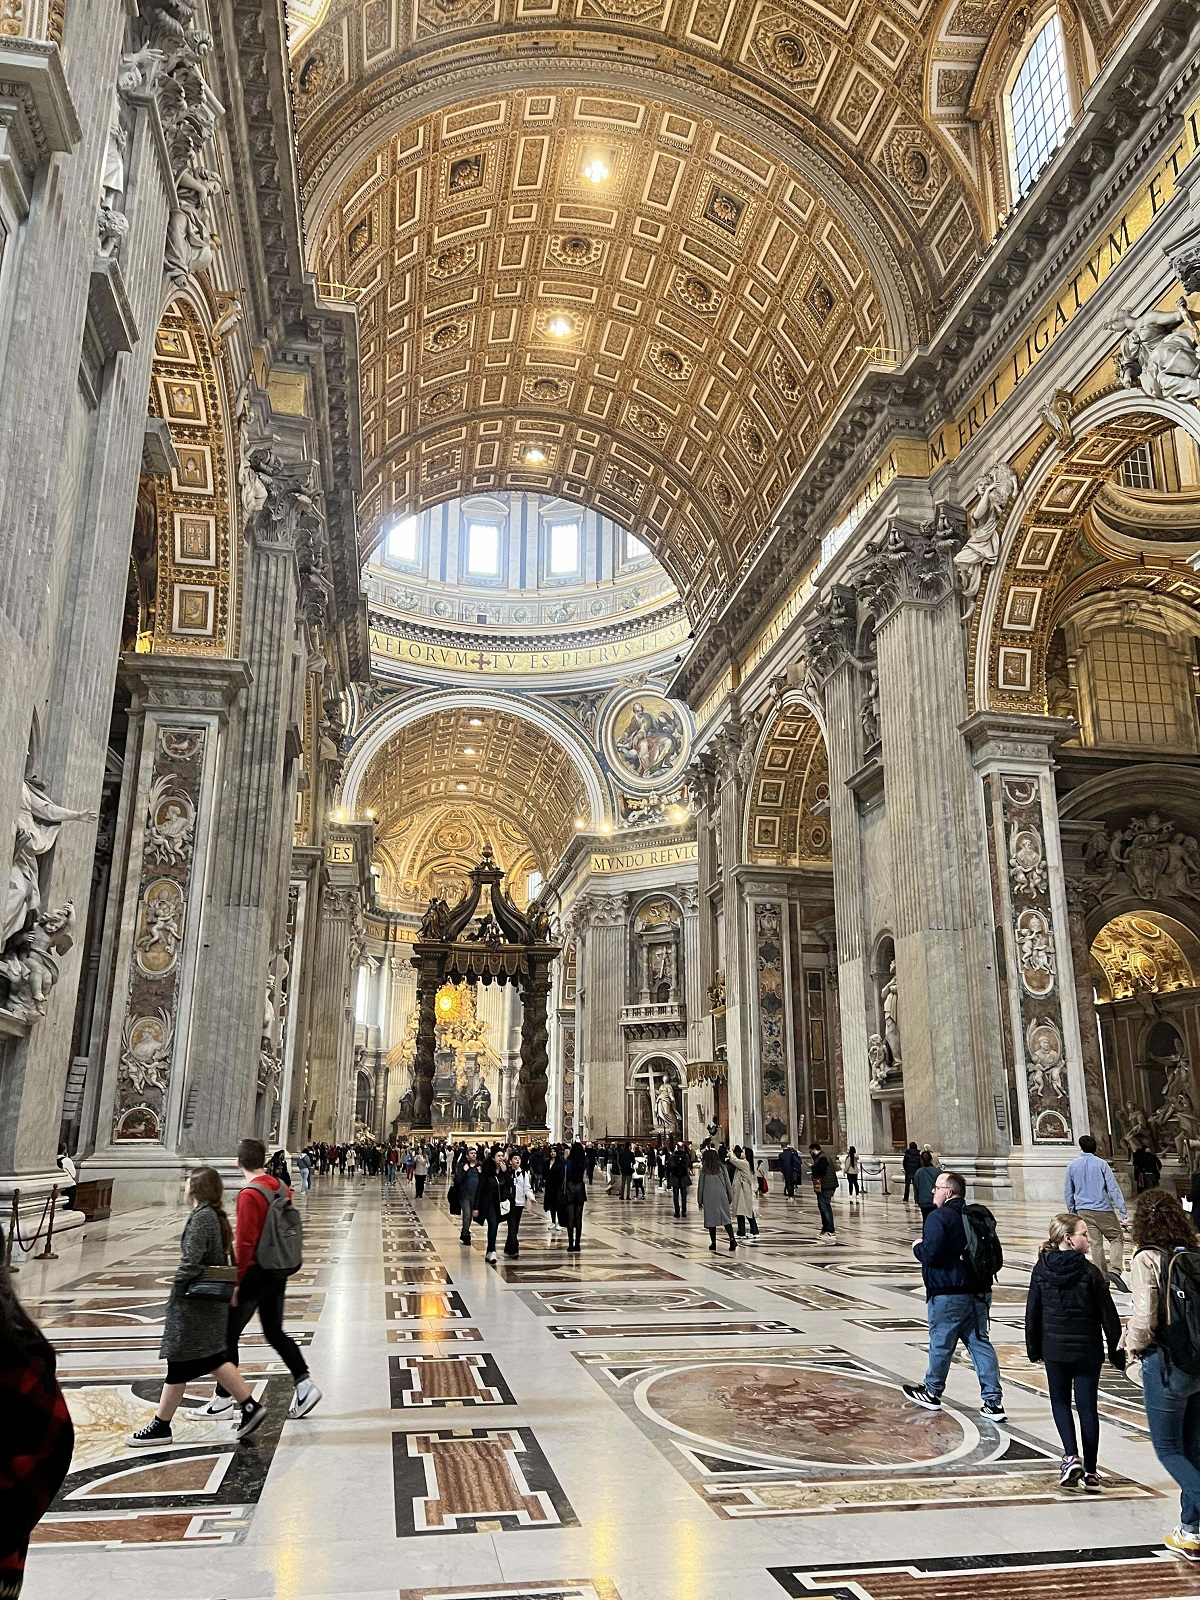 I Went To St. Peter's Basilica Today, And The Sheer Size Of It Made Me Feel A Little Uneasy To Be Honest